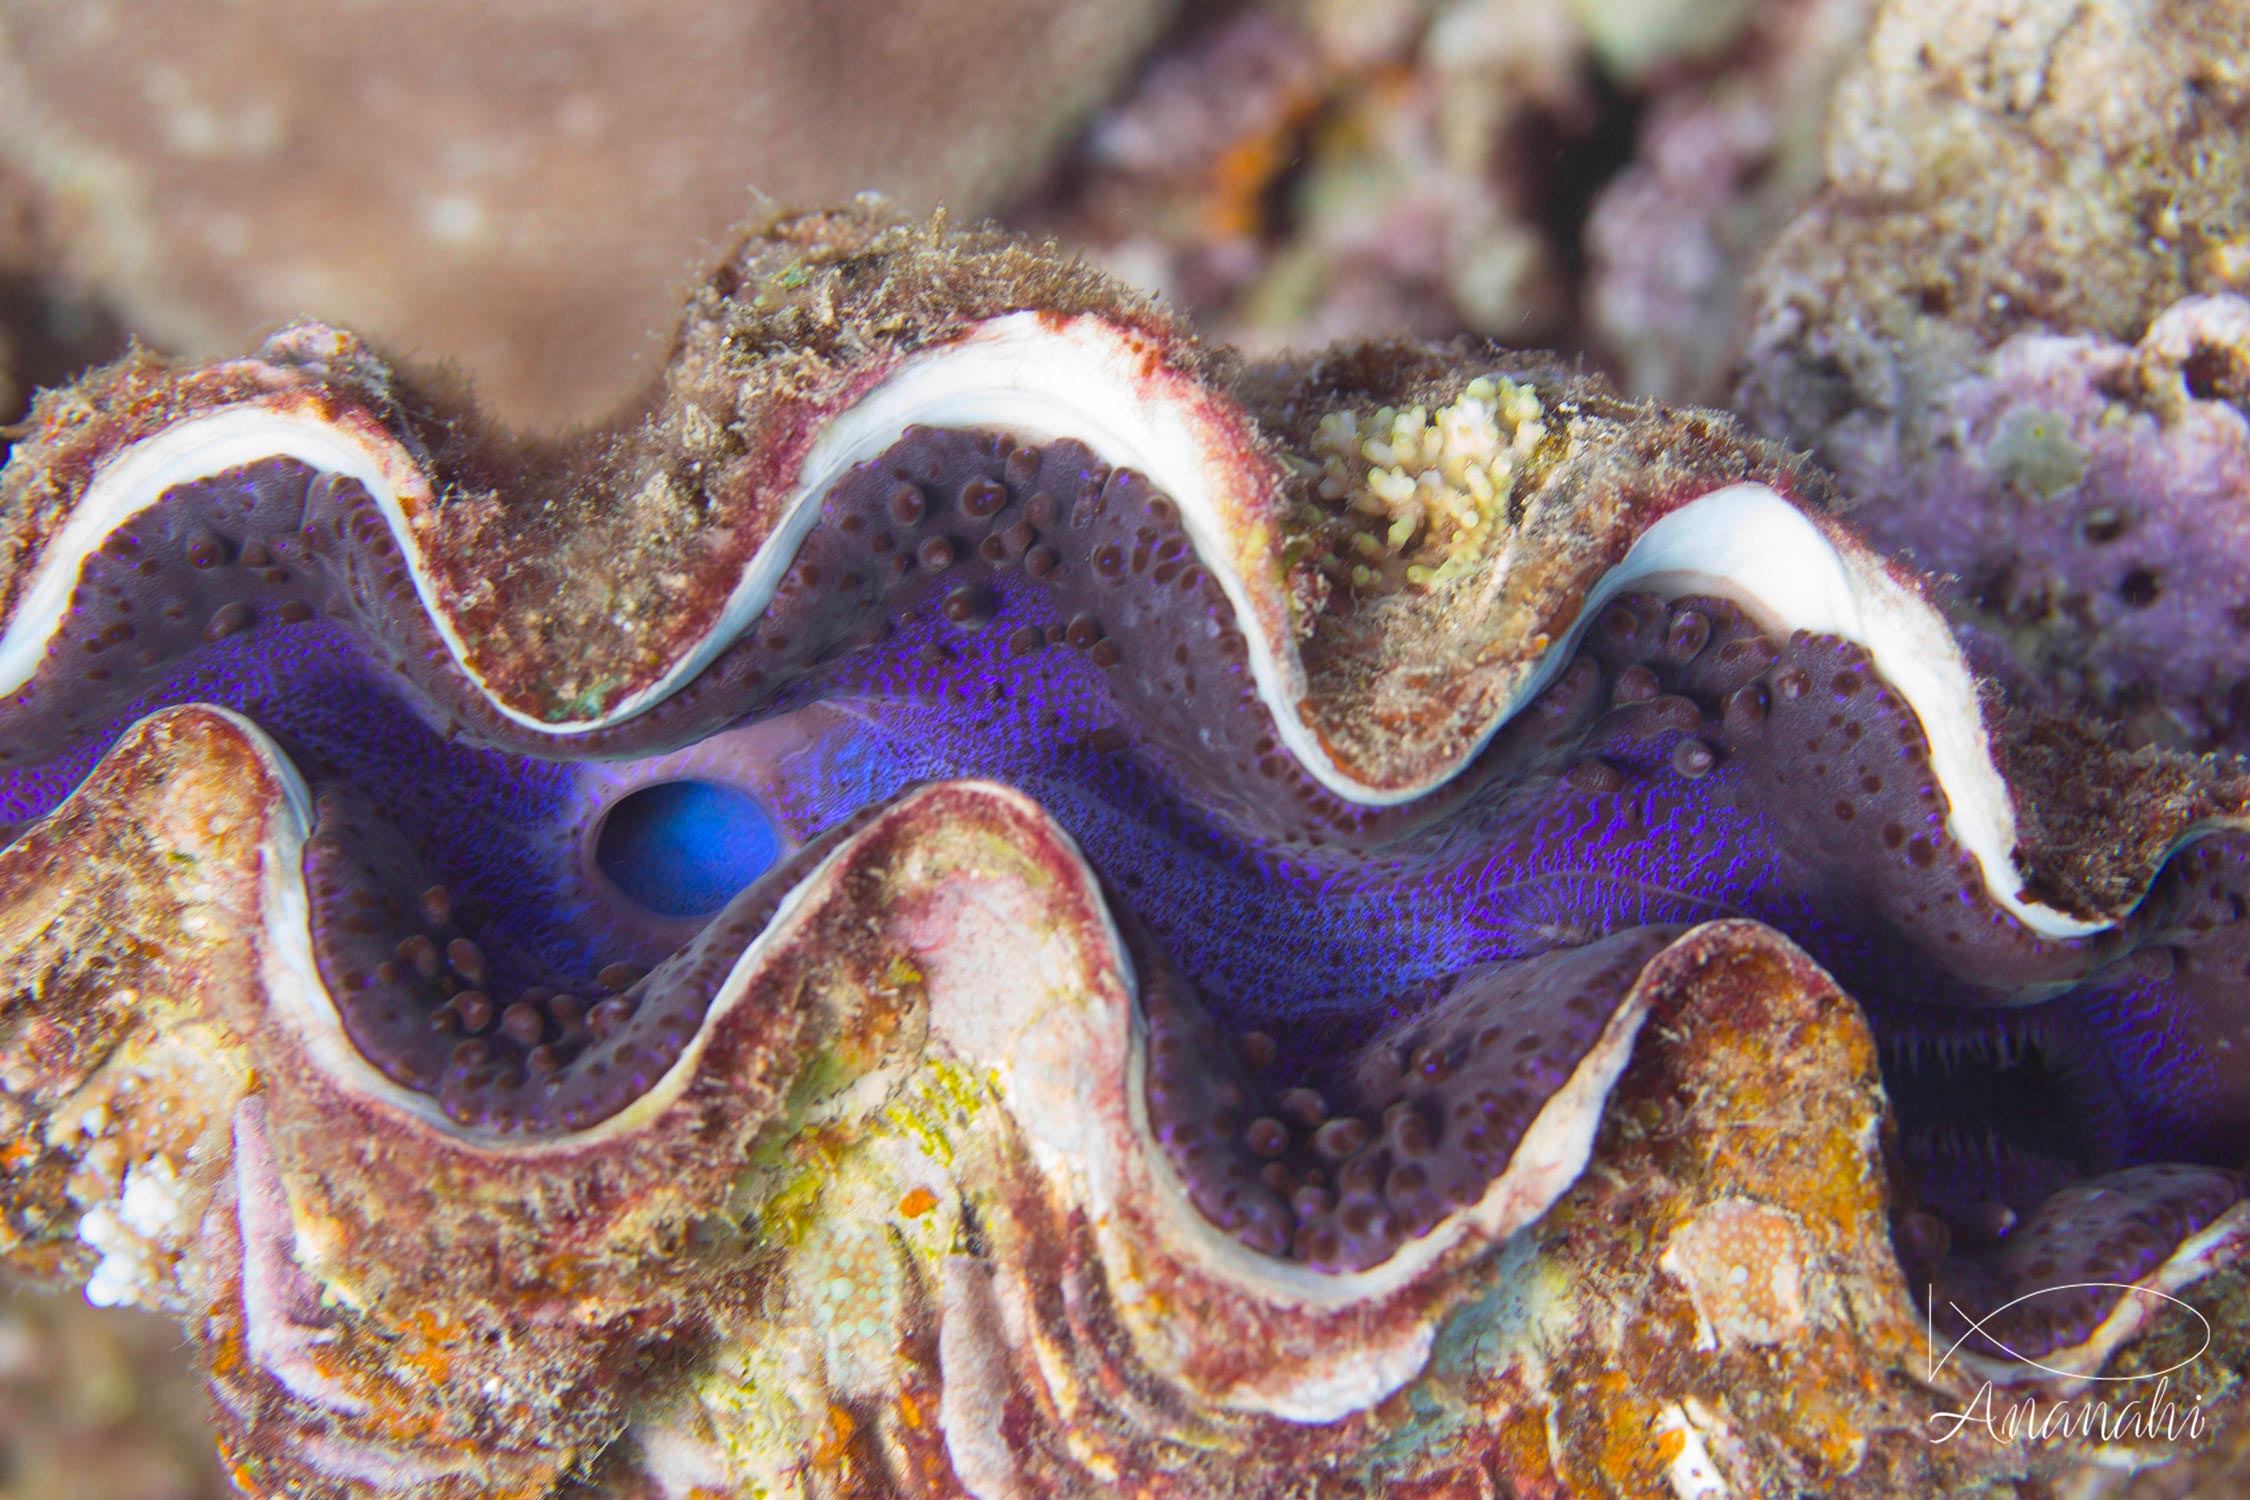 Elongated giant clam of Mayotte